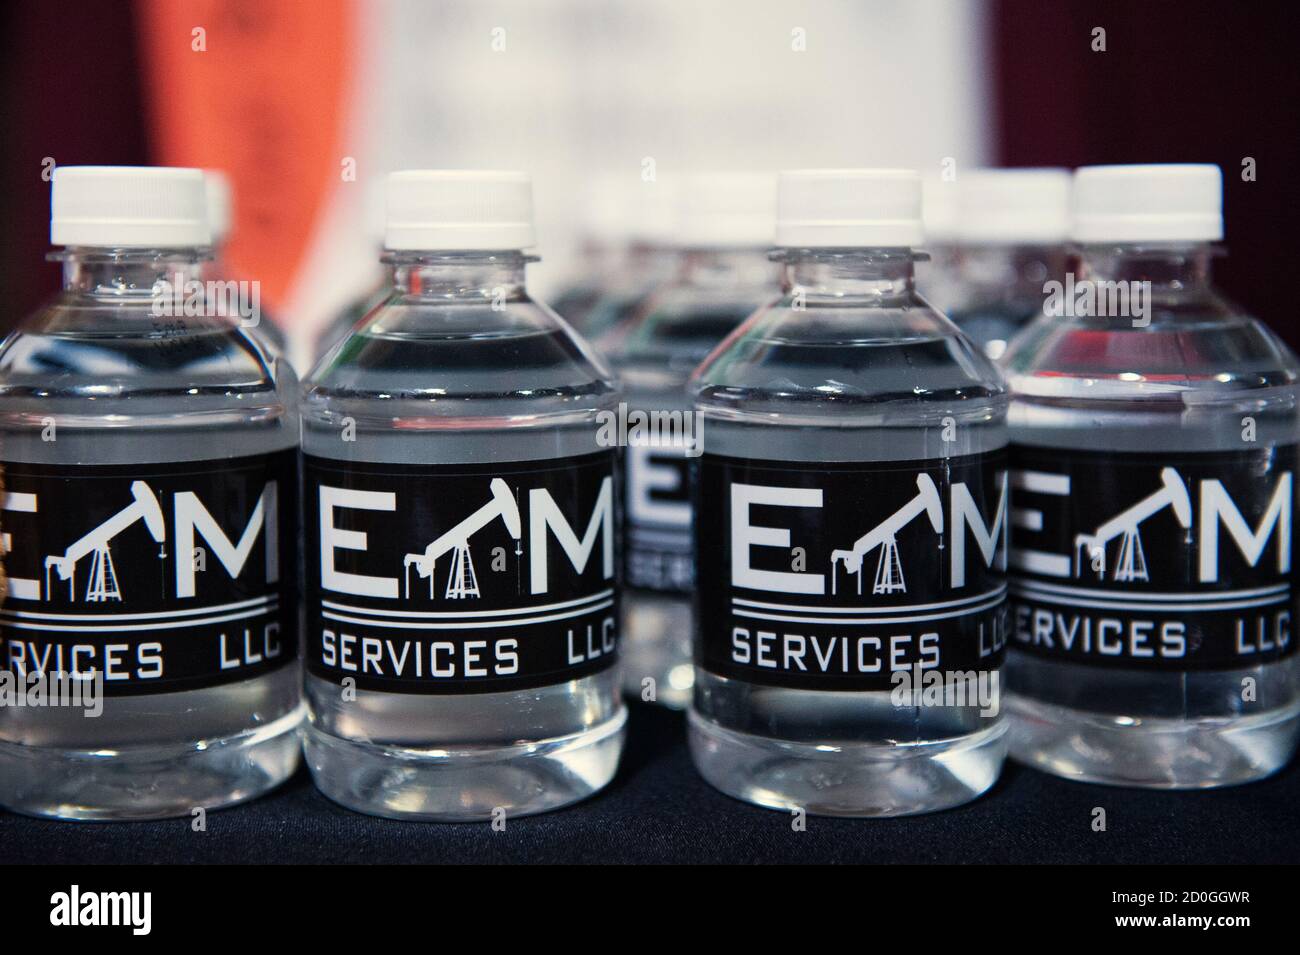 Bottles of water bearing the logo of an oilfield services company are given to jobseekers at a job fair in Williston, North Dakota March 11, 2015. REUTERS/Andrew Cullen    (UNITED STATES) Stock Photo